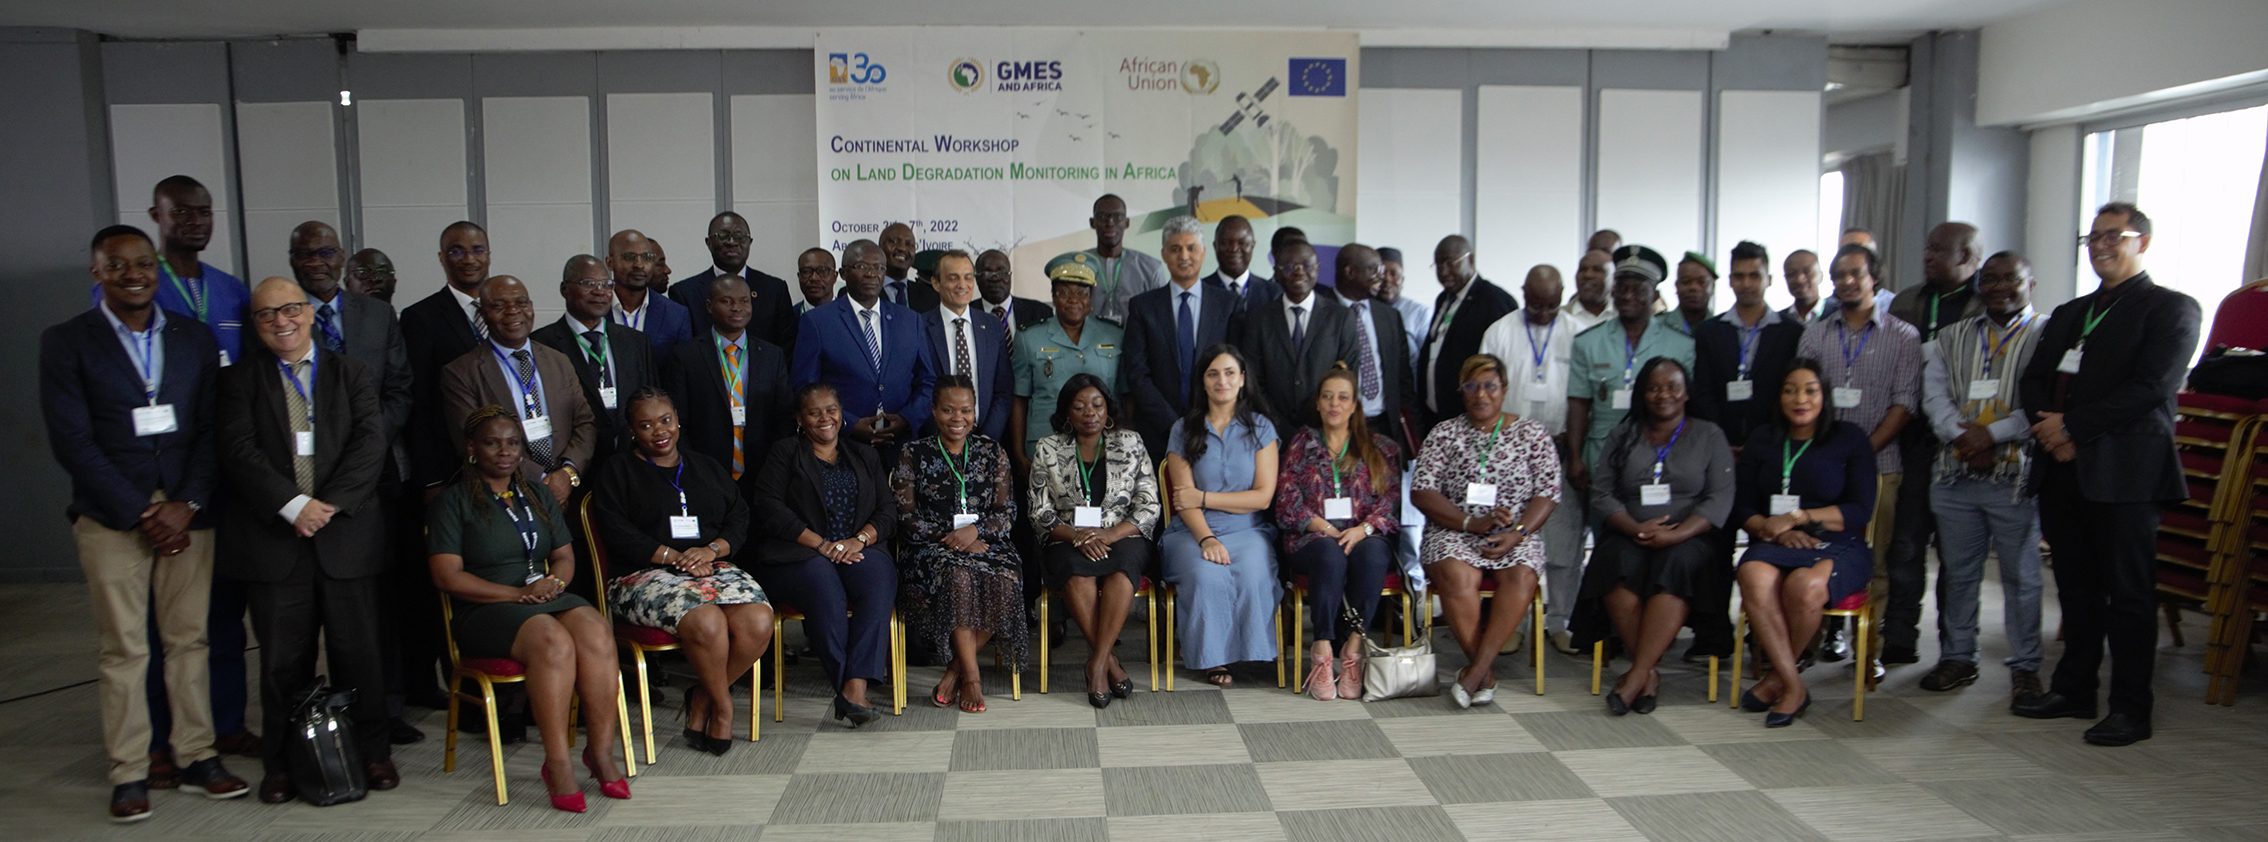 Start of the "Continental Workshop on Land Degradation Monitoring in Africa"